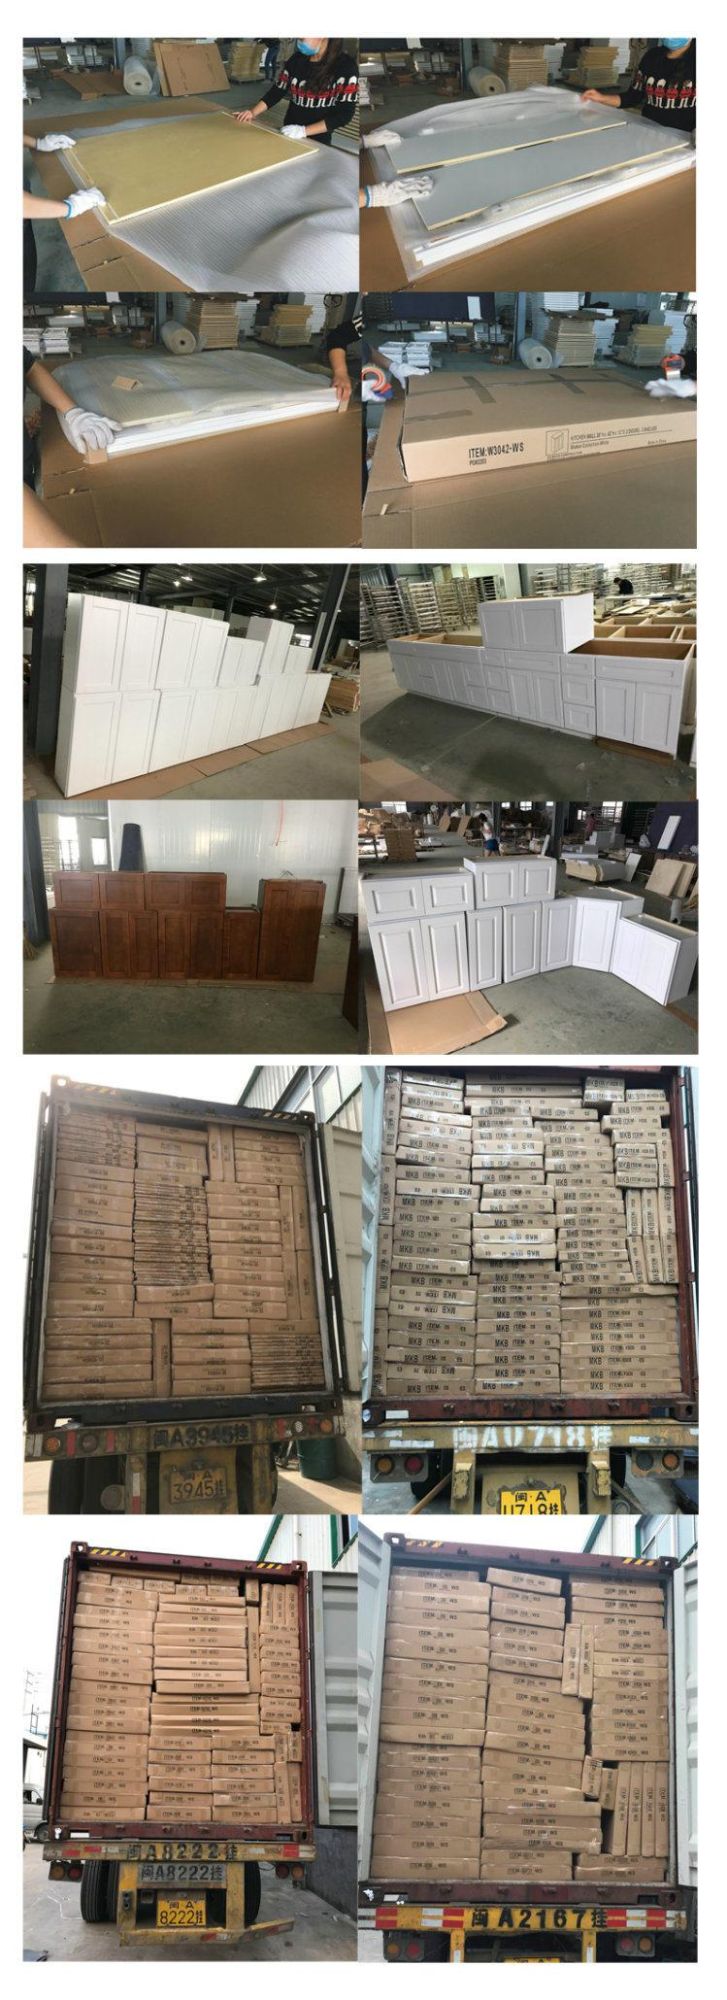 ODM Kd (Flat-Packed) Plywood Cabinext Customized Fuzhou China Products Bedroom Wardrobe Cabinet Kitchen Cabinets